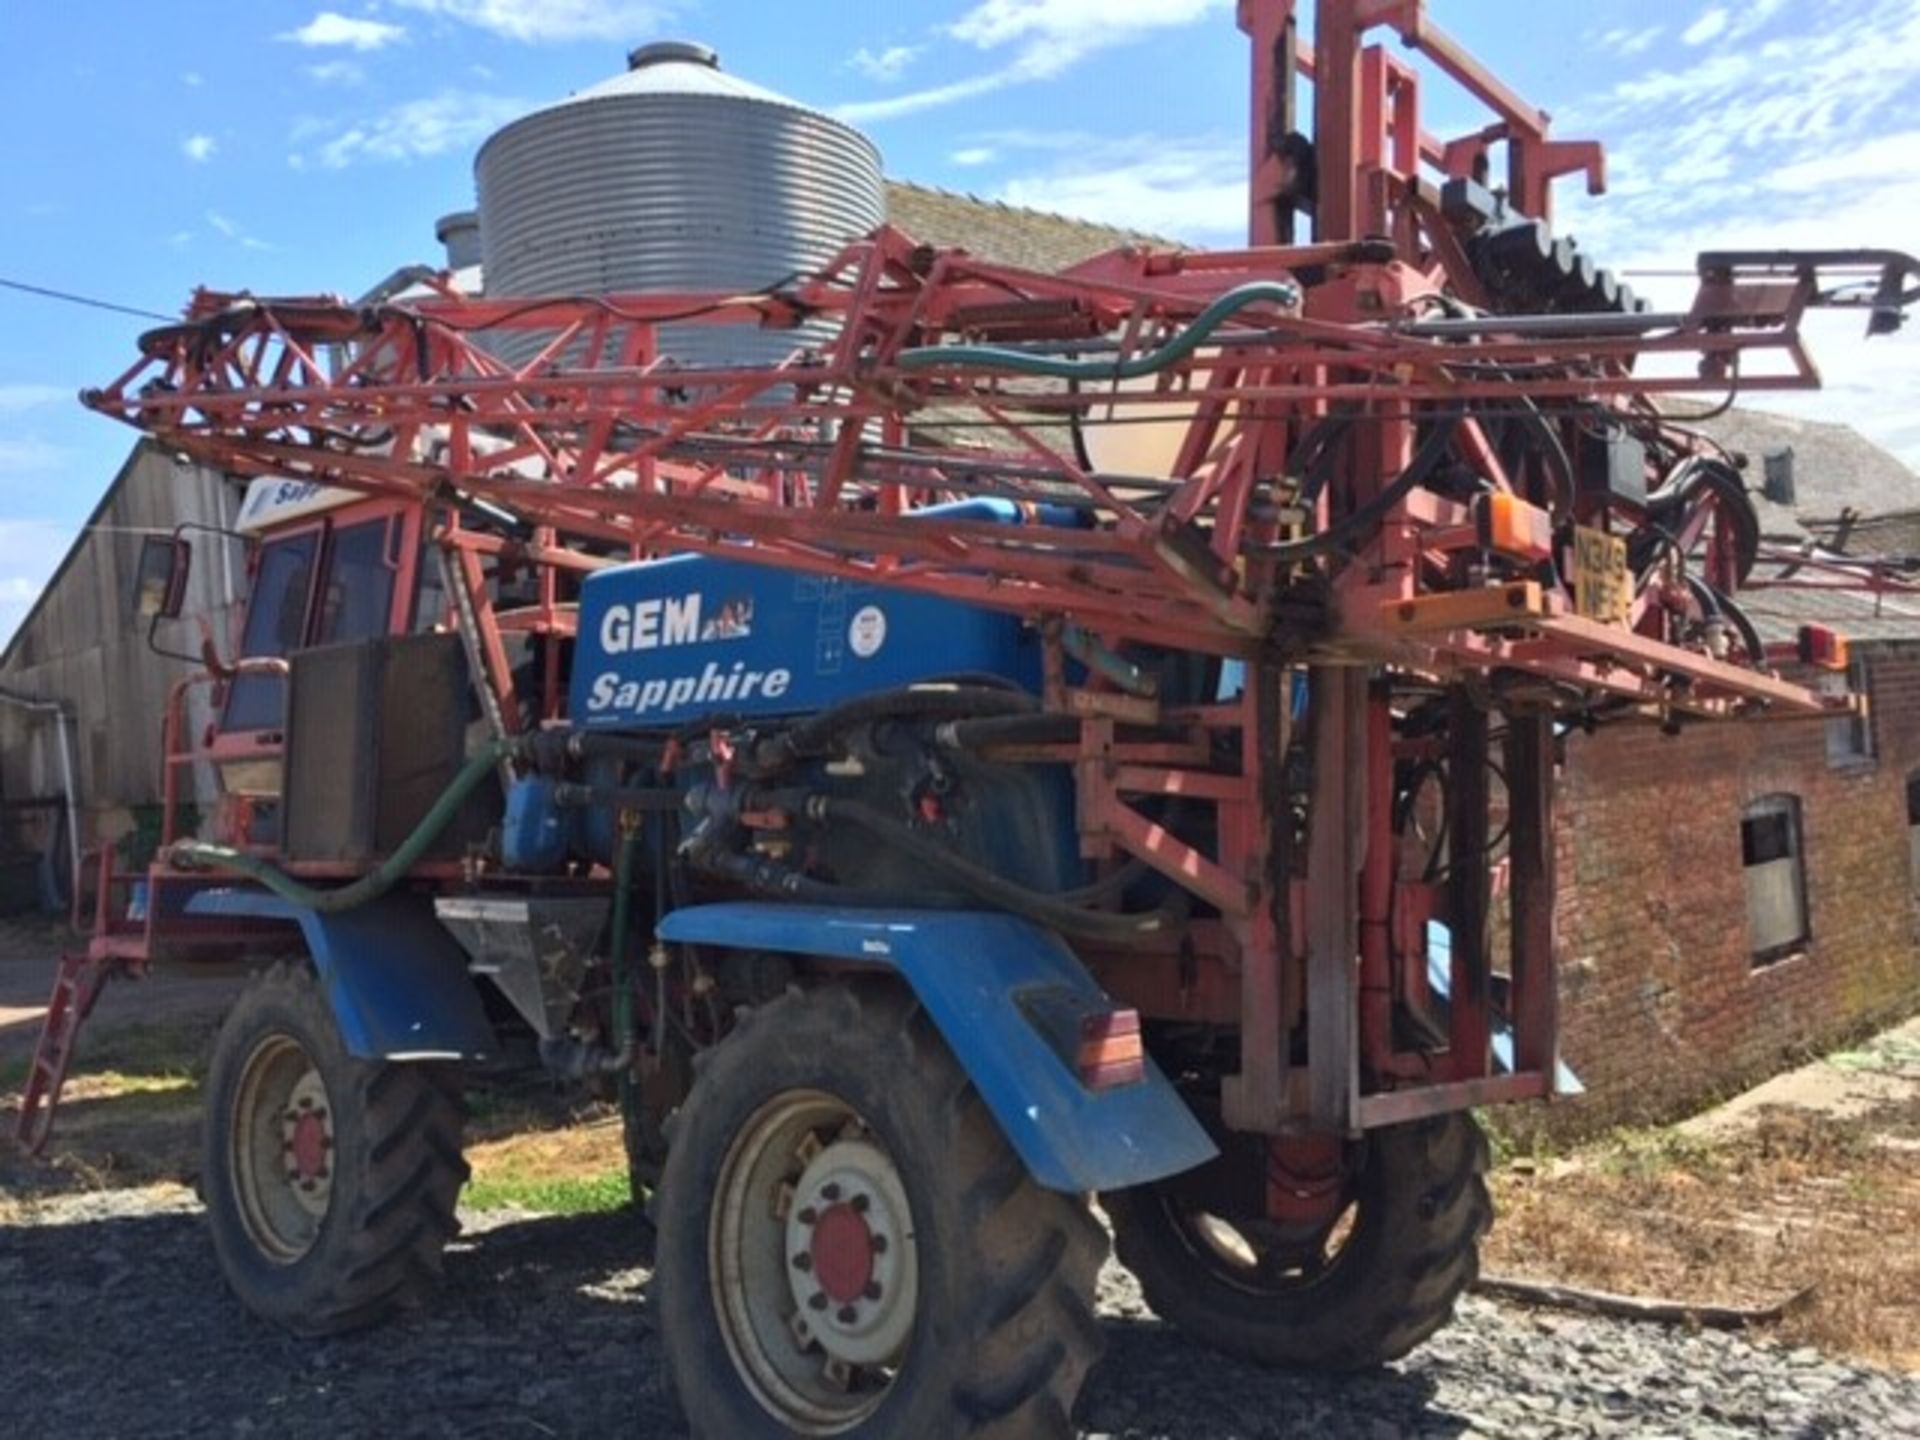 GEM SAPHIRE SELF PROPELLED SPRAYER WITH 2 SETS OF WHEELS ROWCROPS , 24MTR BOOM REG N349 NFE 1997 - Image 2 of 5